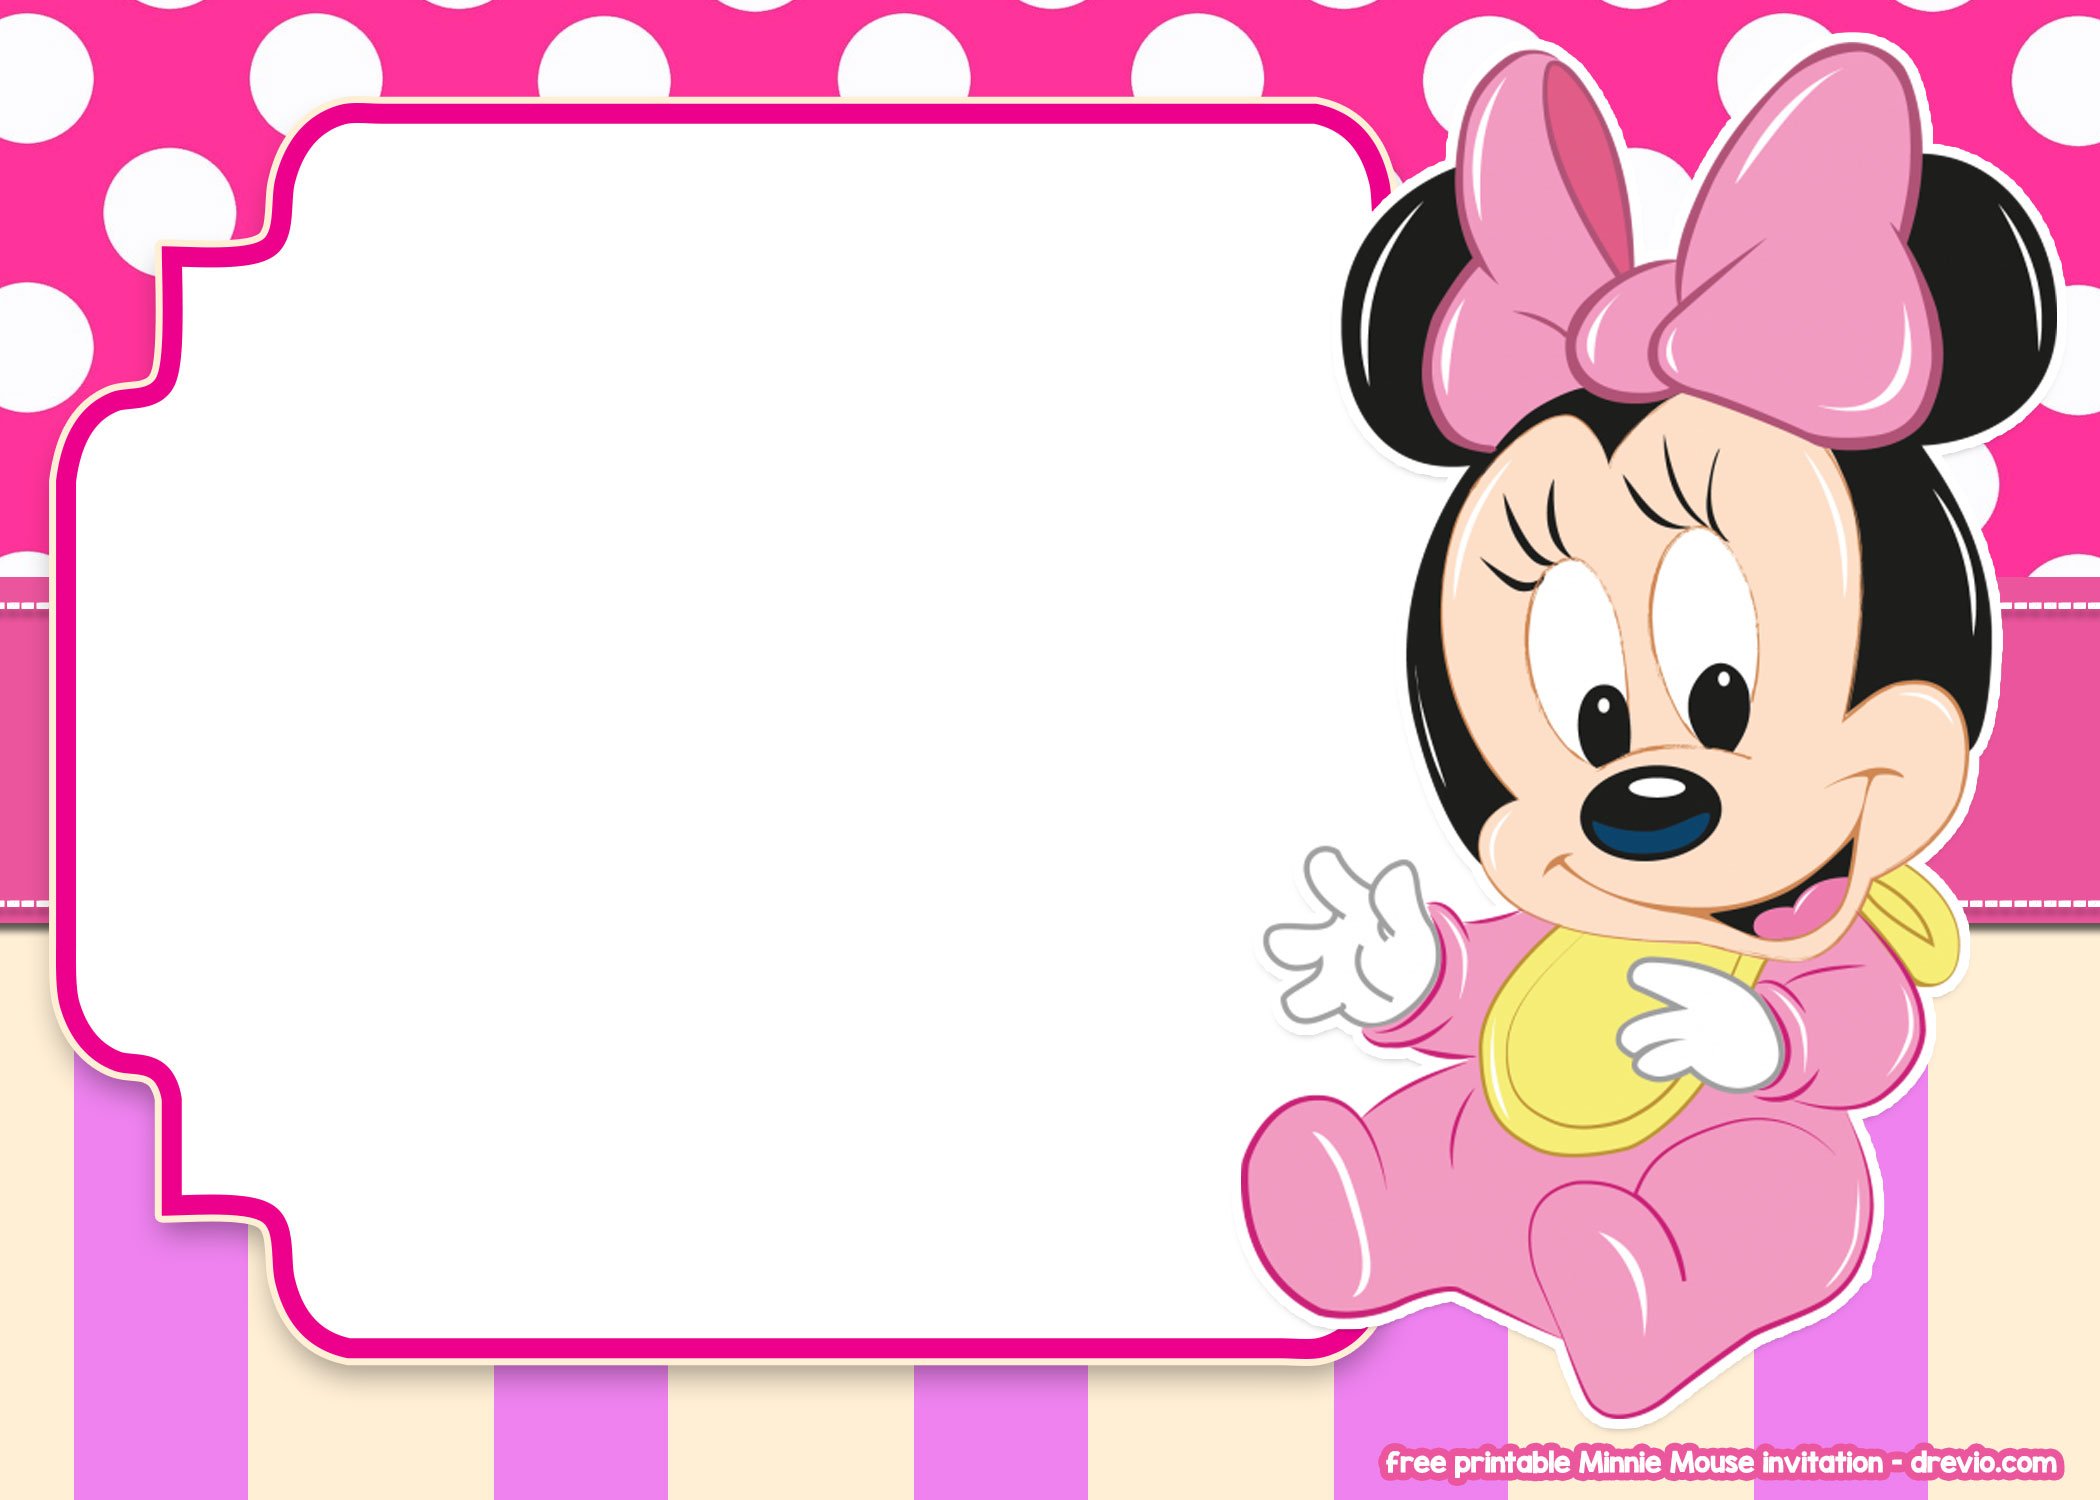 14-free-printable-minnie-mouse-all-ages-invitation-templatesfree-printable-birthday-invitation